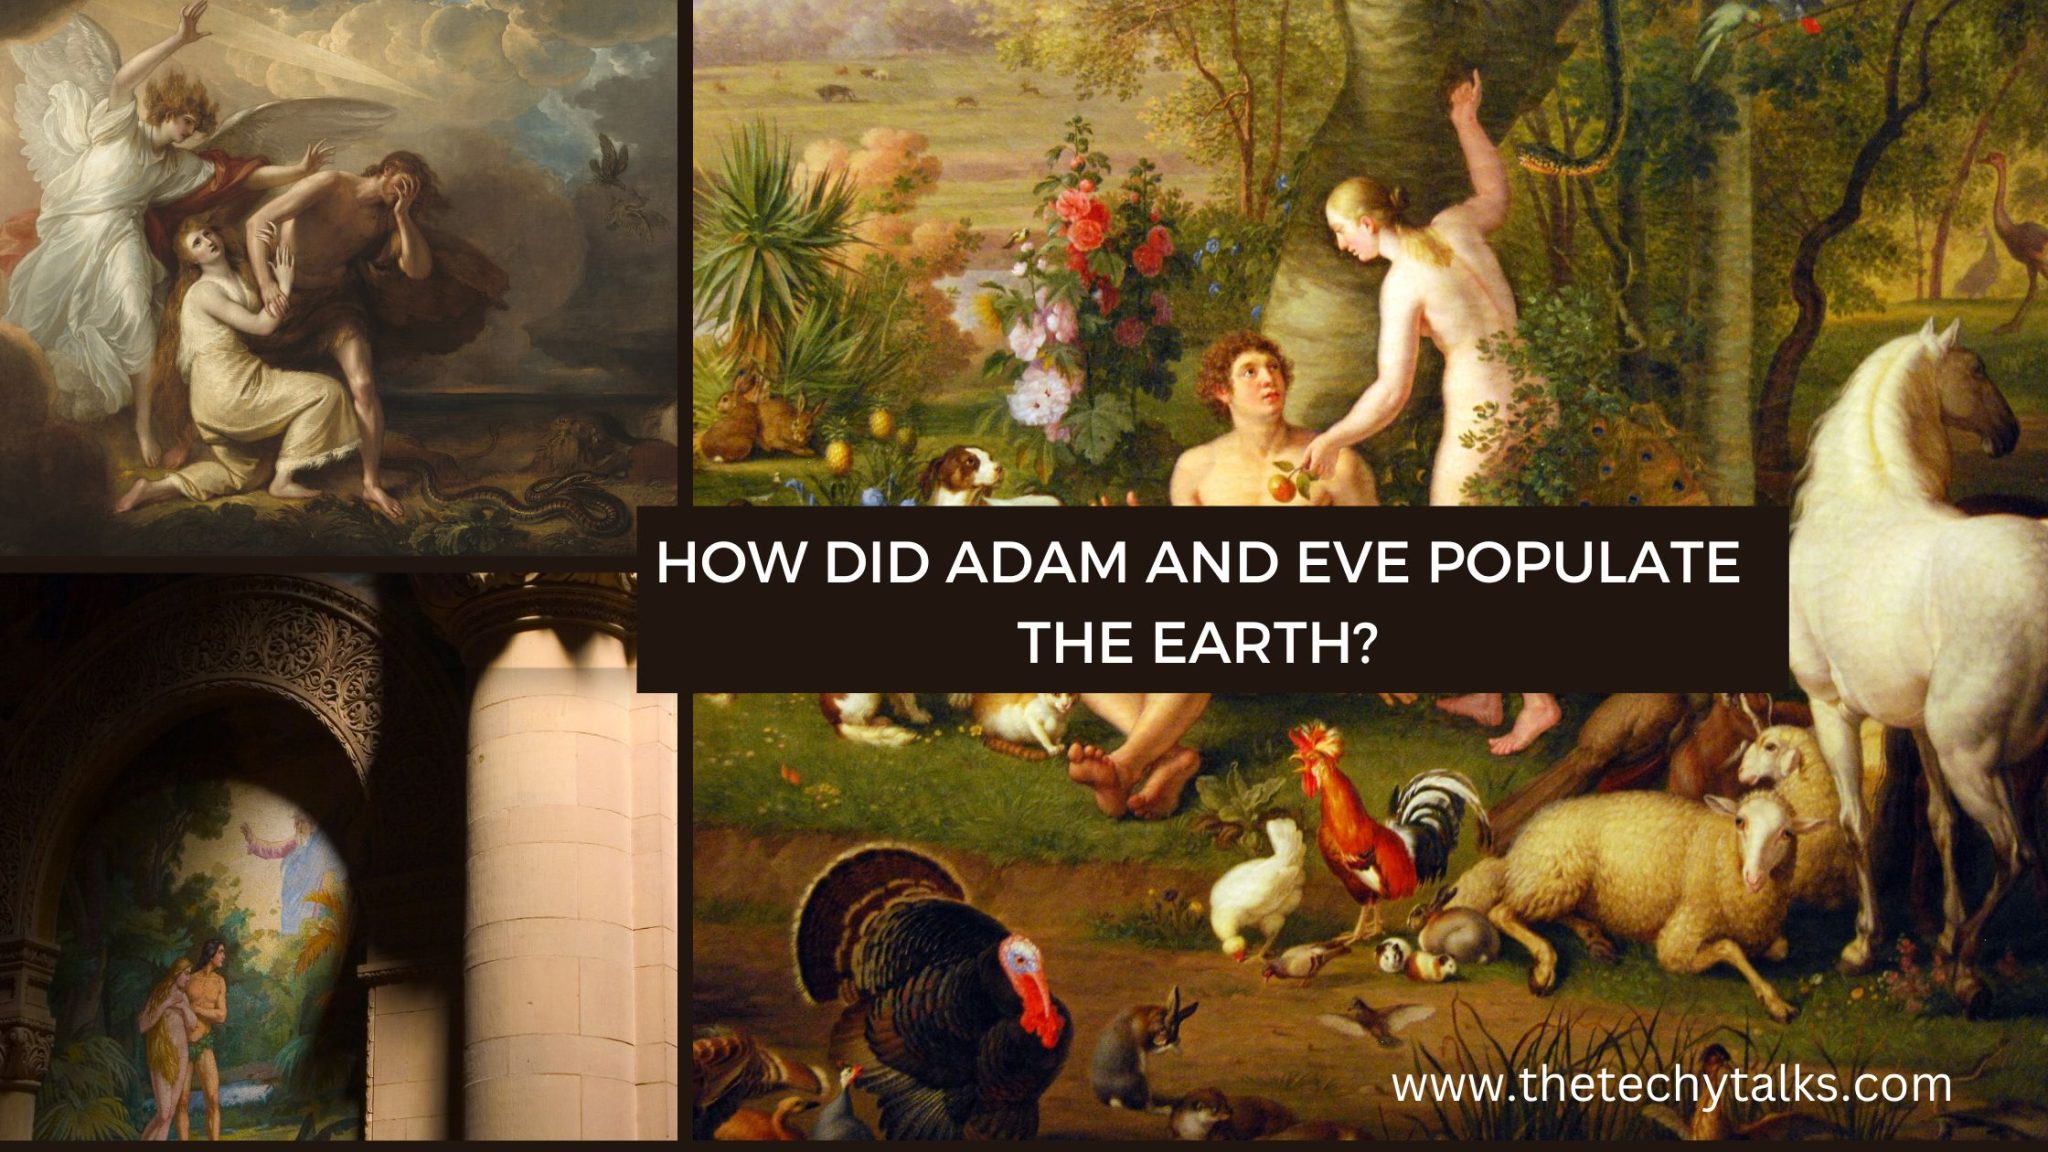 How did adam and eve populate the earth?